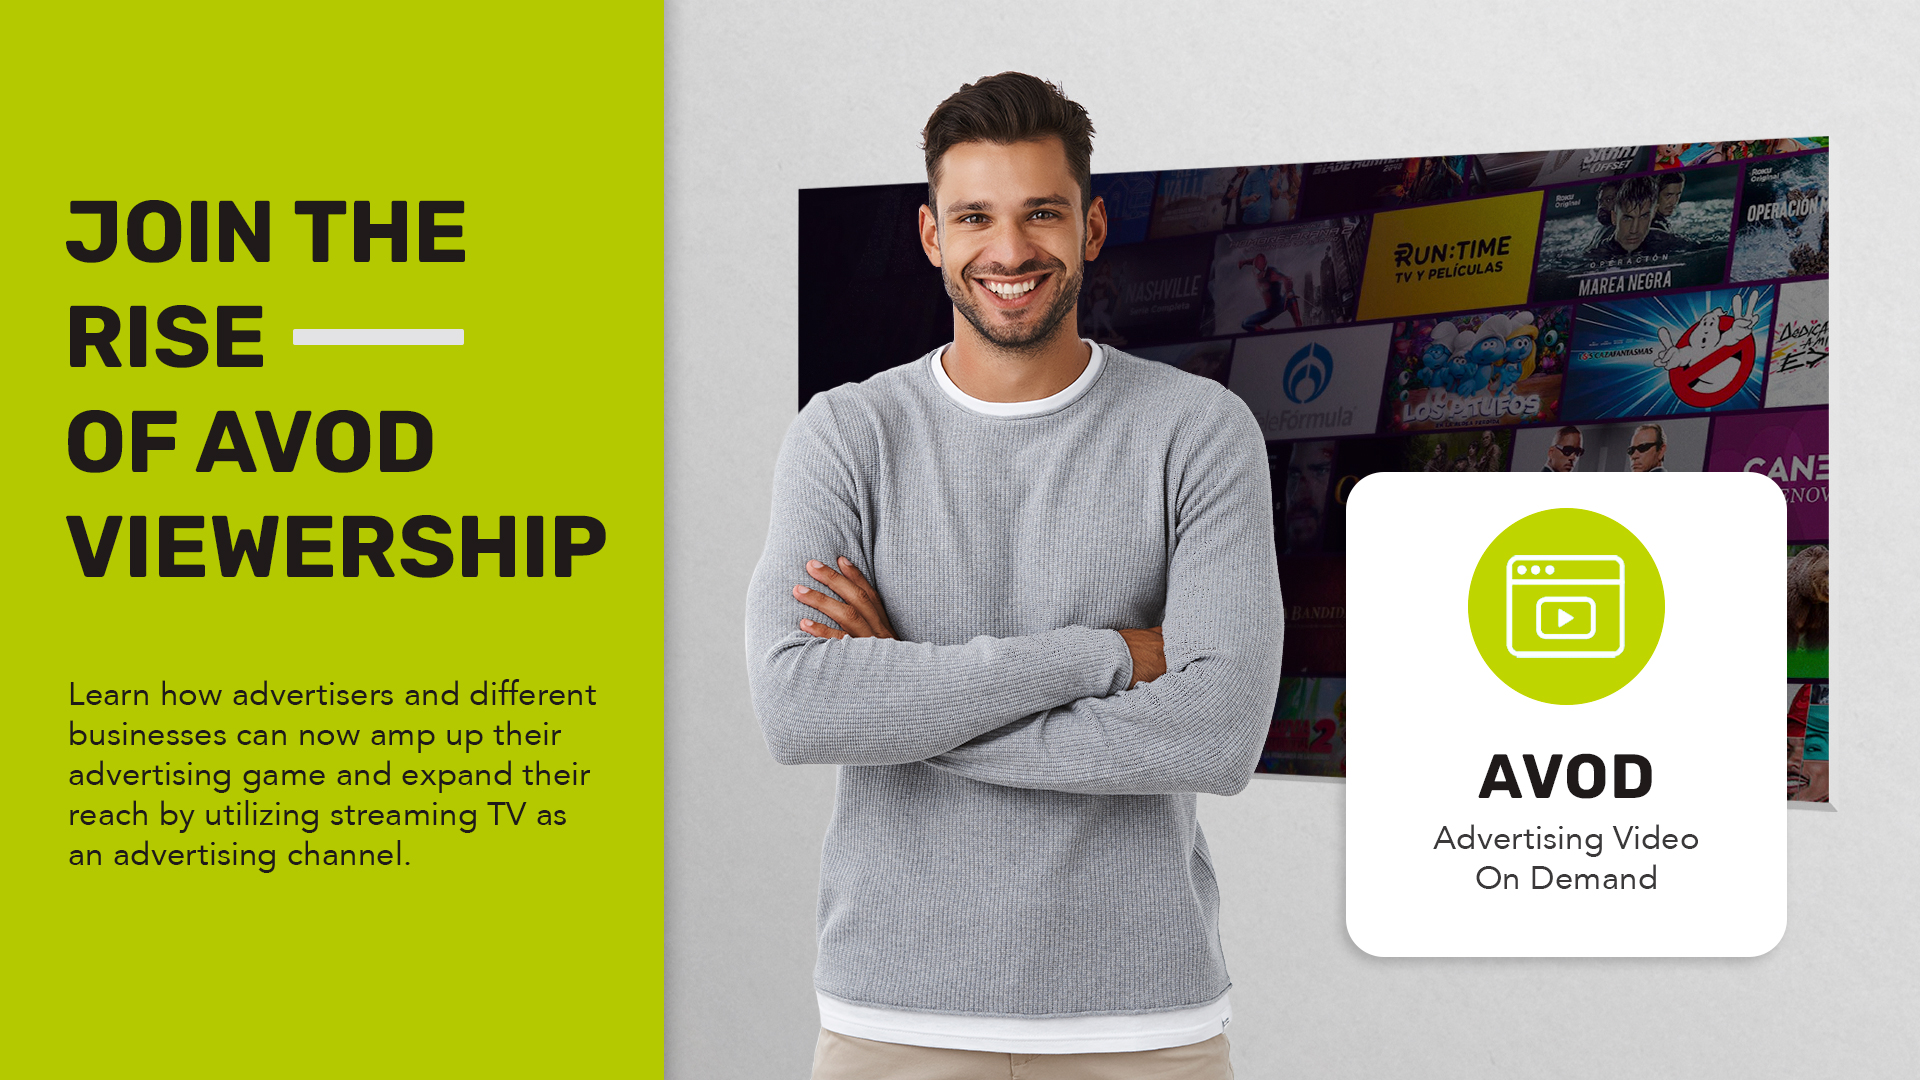 AVOD Viewership Is On The Rise! How To Reach This Growing Audience